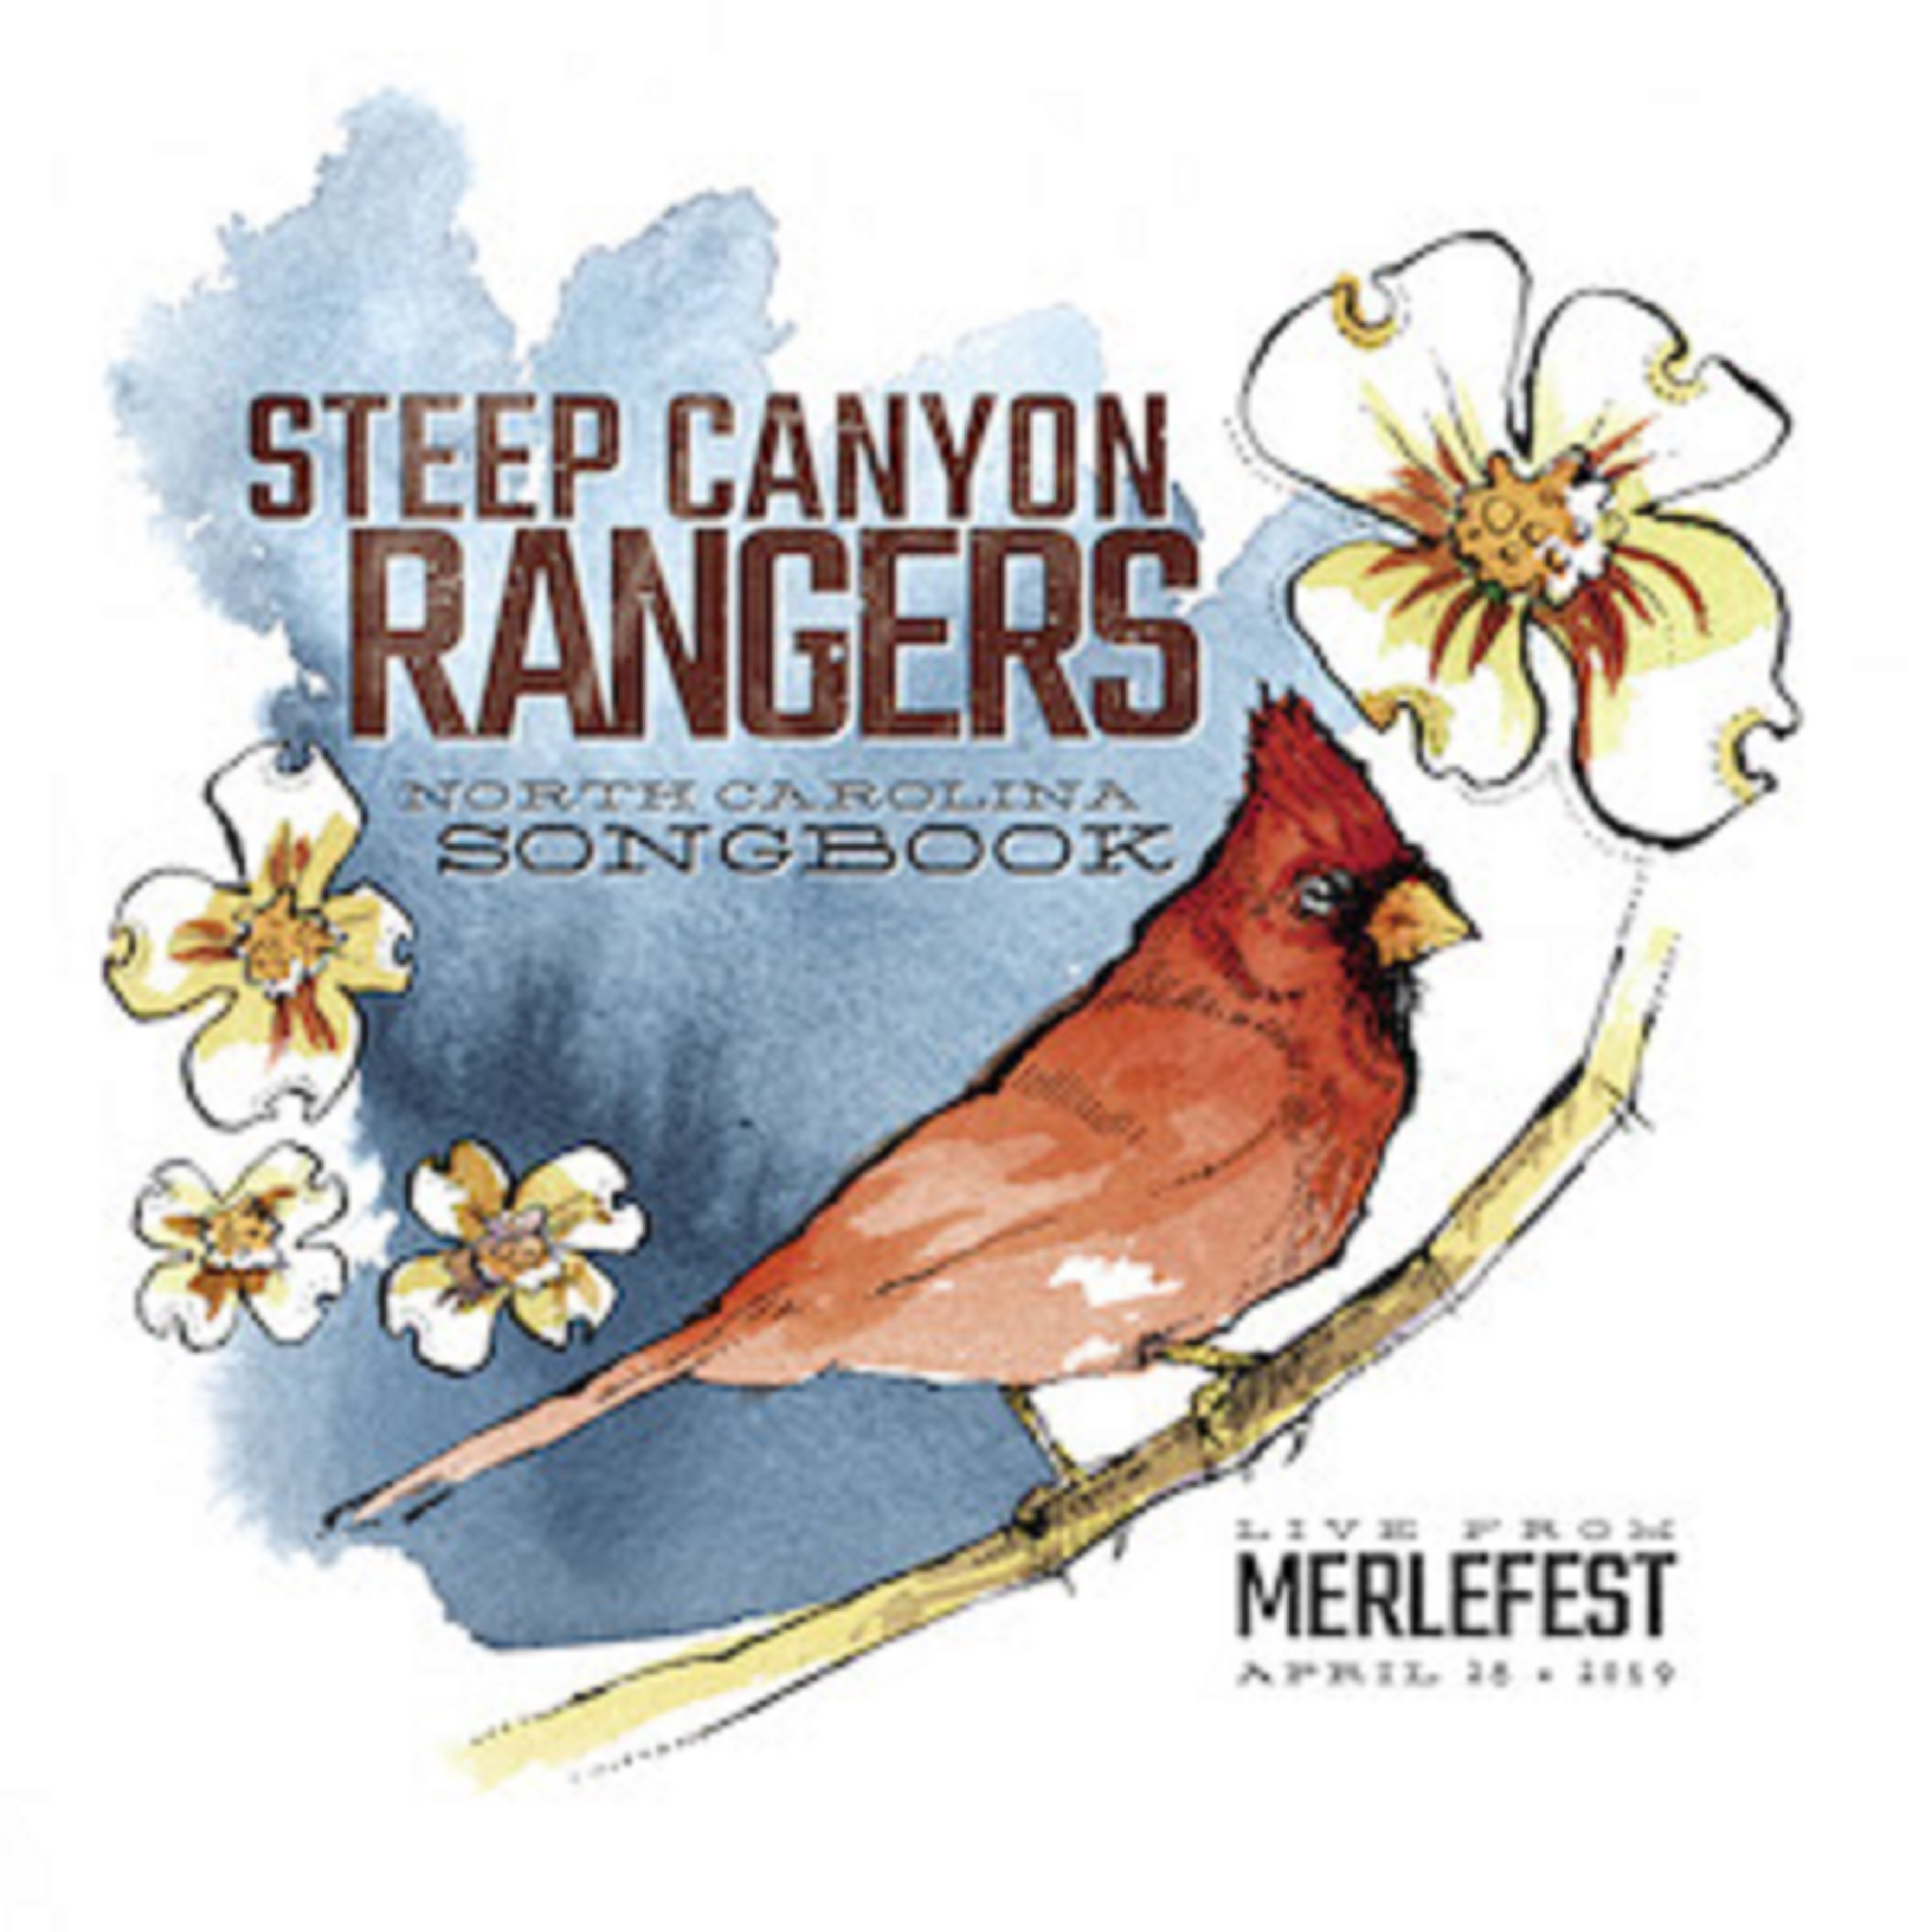 Steep Canyon Rangers Earn Best Bluegrass Album GRAMMY Nomination for 'North Carolina Songbook'